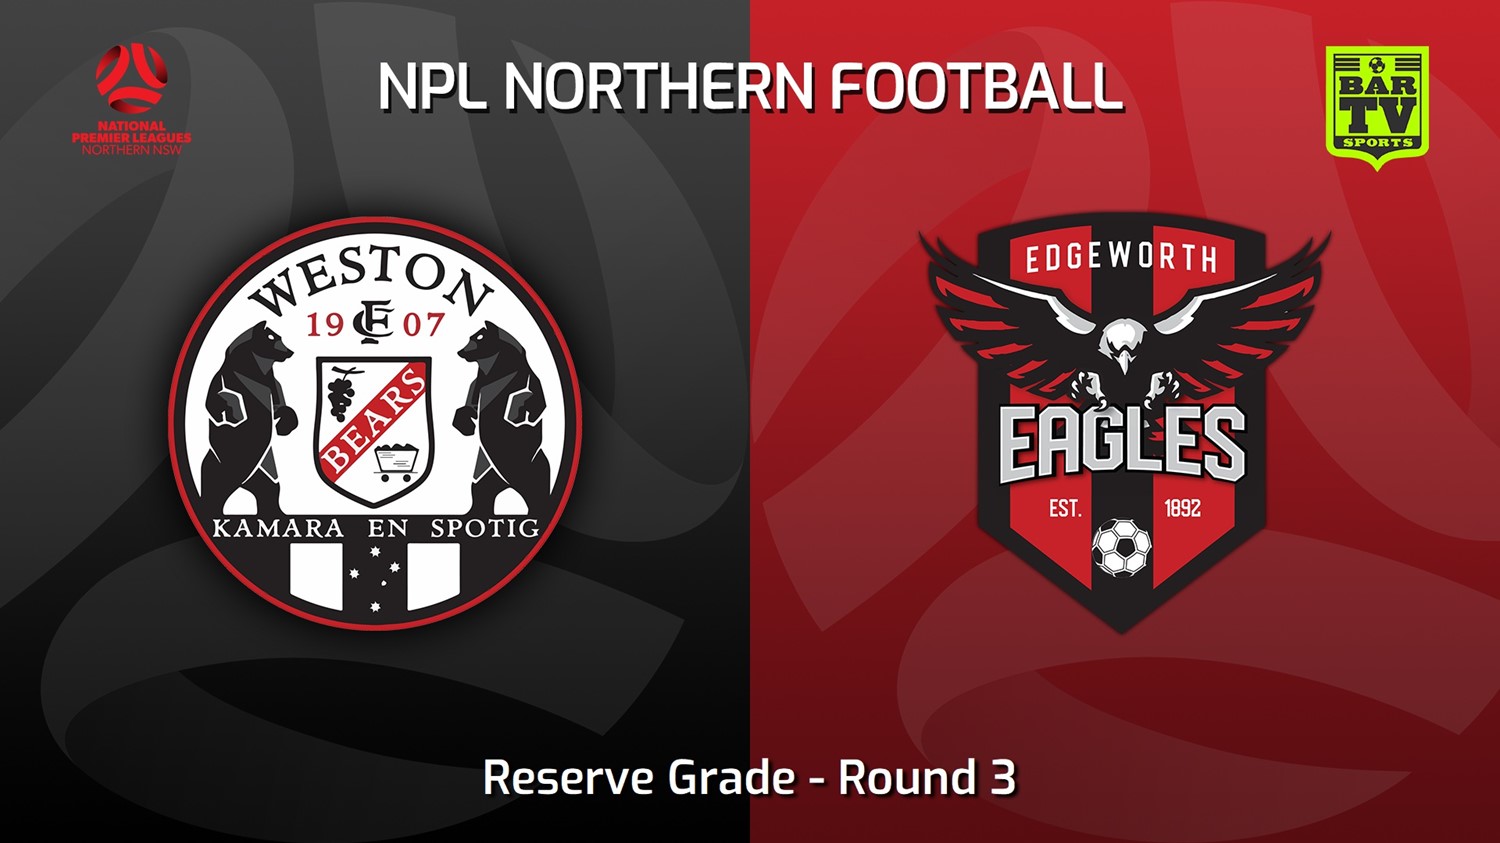 230317-NNSW NPLM Res Round 3 - Weston Workers FC Res v Edgeworth Eagles Res Minigame Slate Image